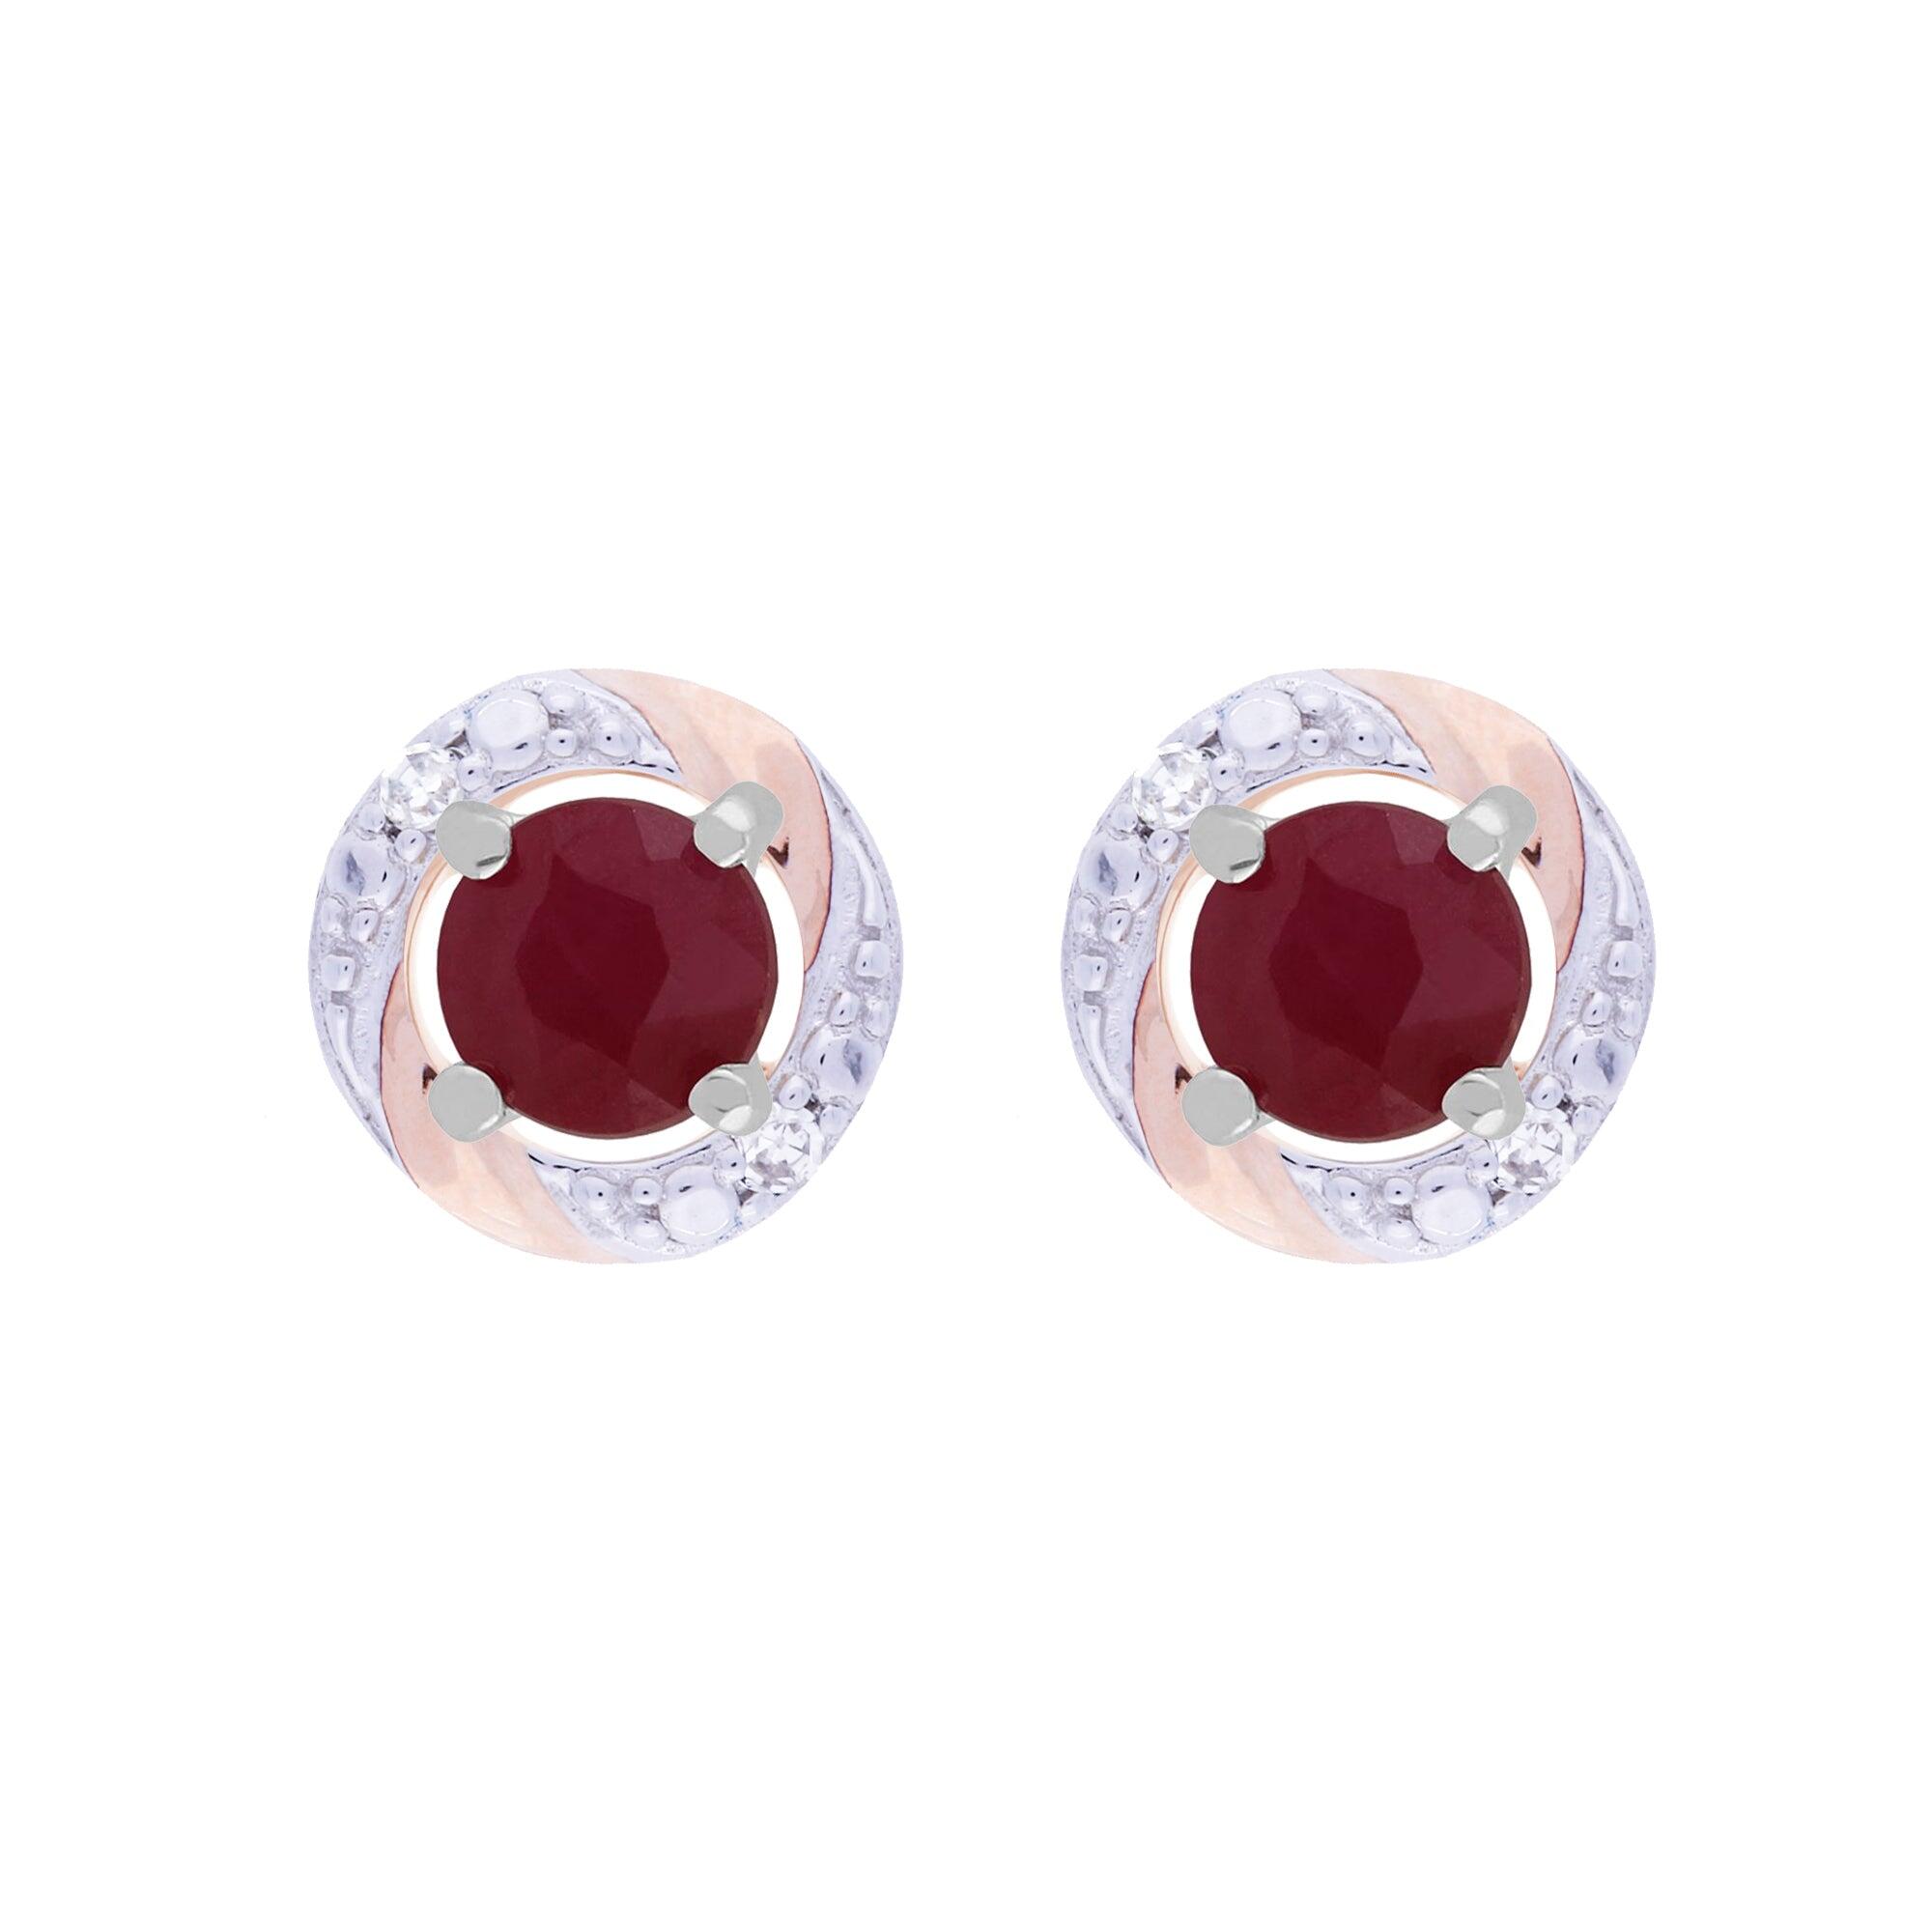 Classic Round Ruby Stud Earrings with Detachable Diamond Round Earrings Jacket Set in 9ct White Gold